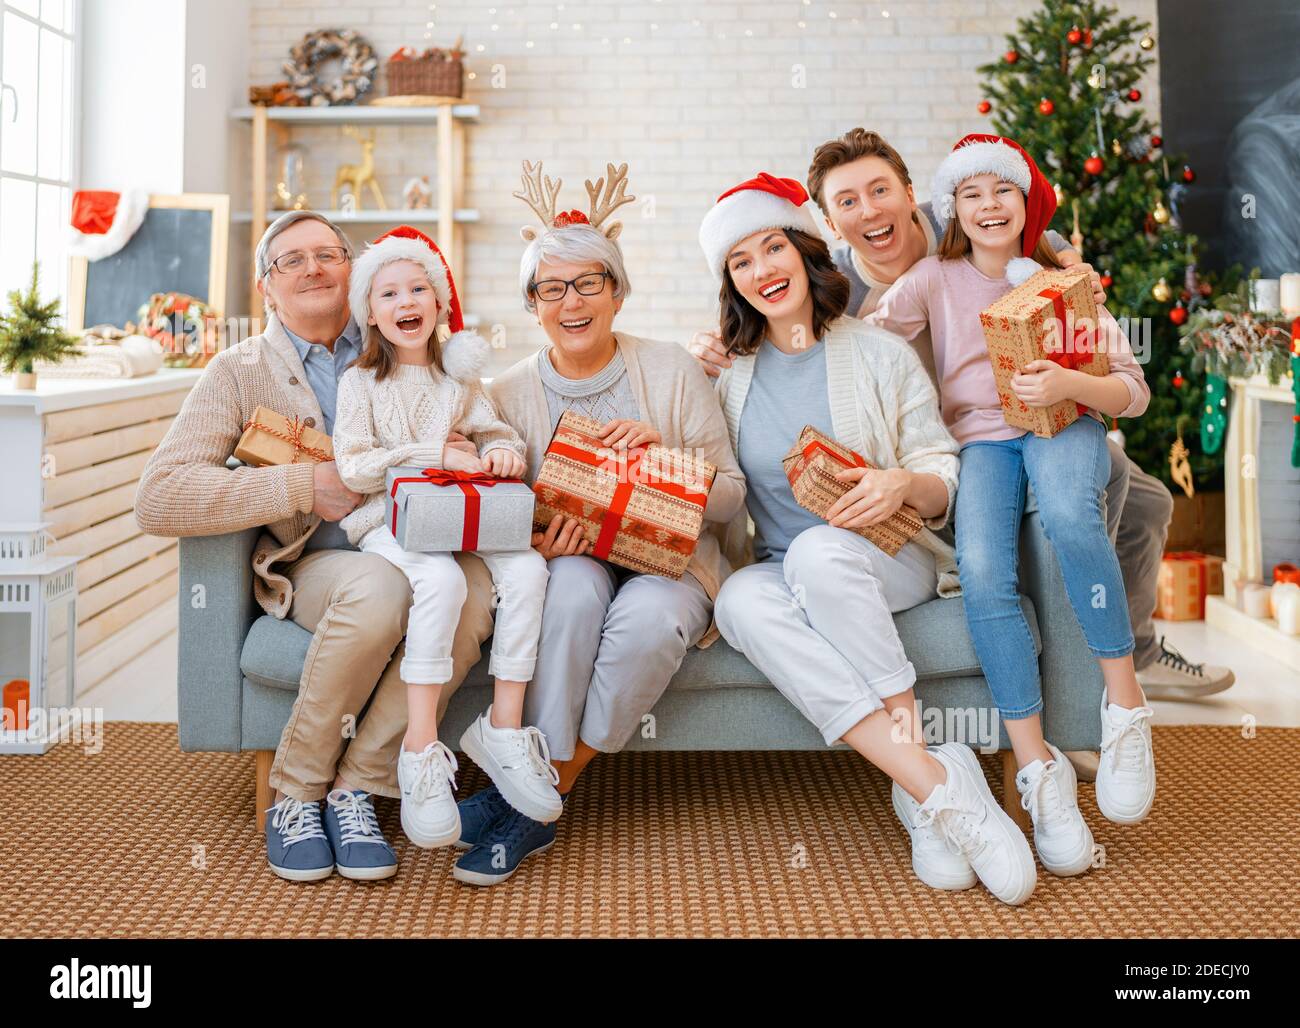 Premium Photo  Merry christmas and happy holidays! cheerful grandma and  her cute grand daughter girl exchanging gifts. granny and little child  having fun near tree indoors. loving family with presents in